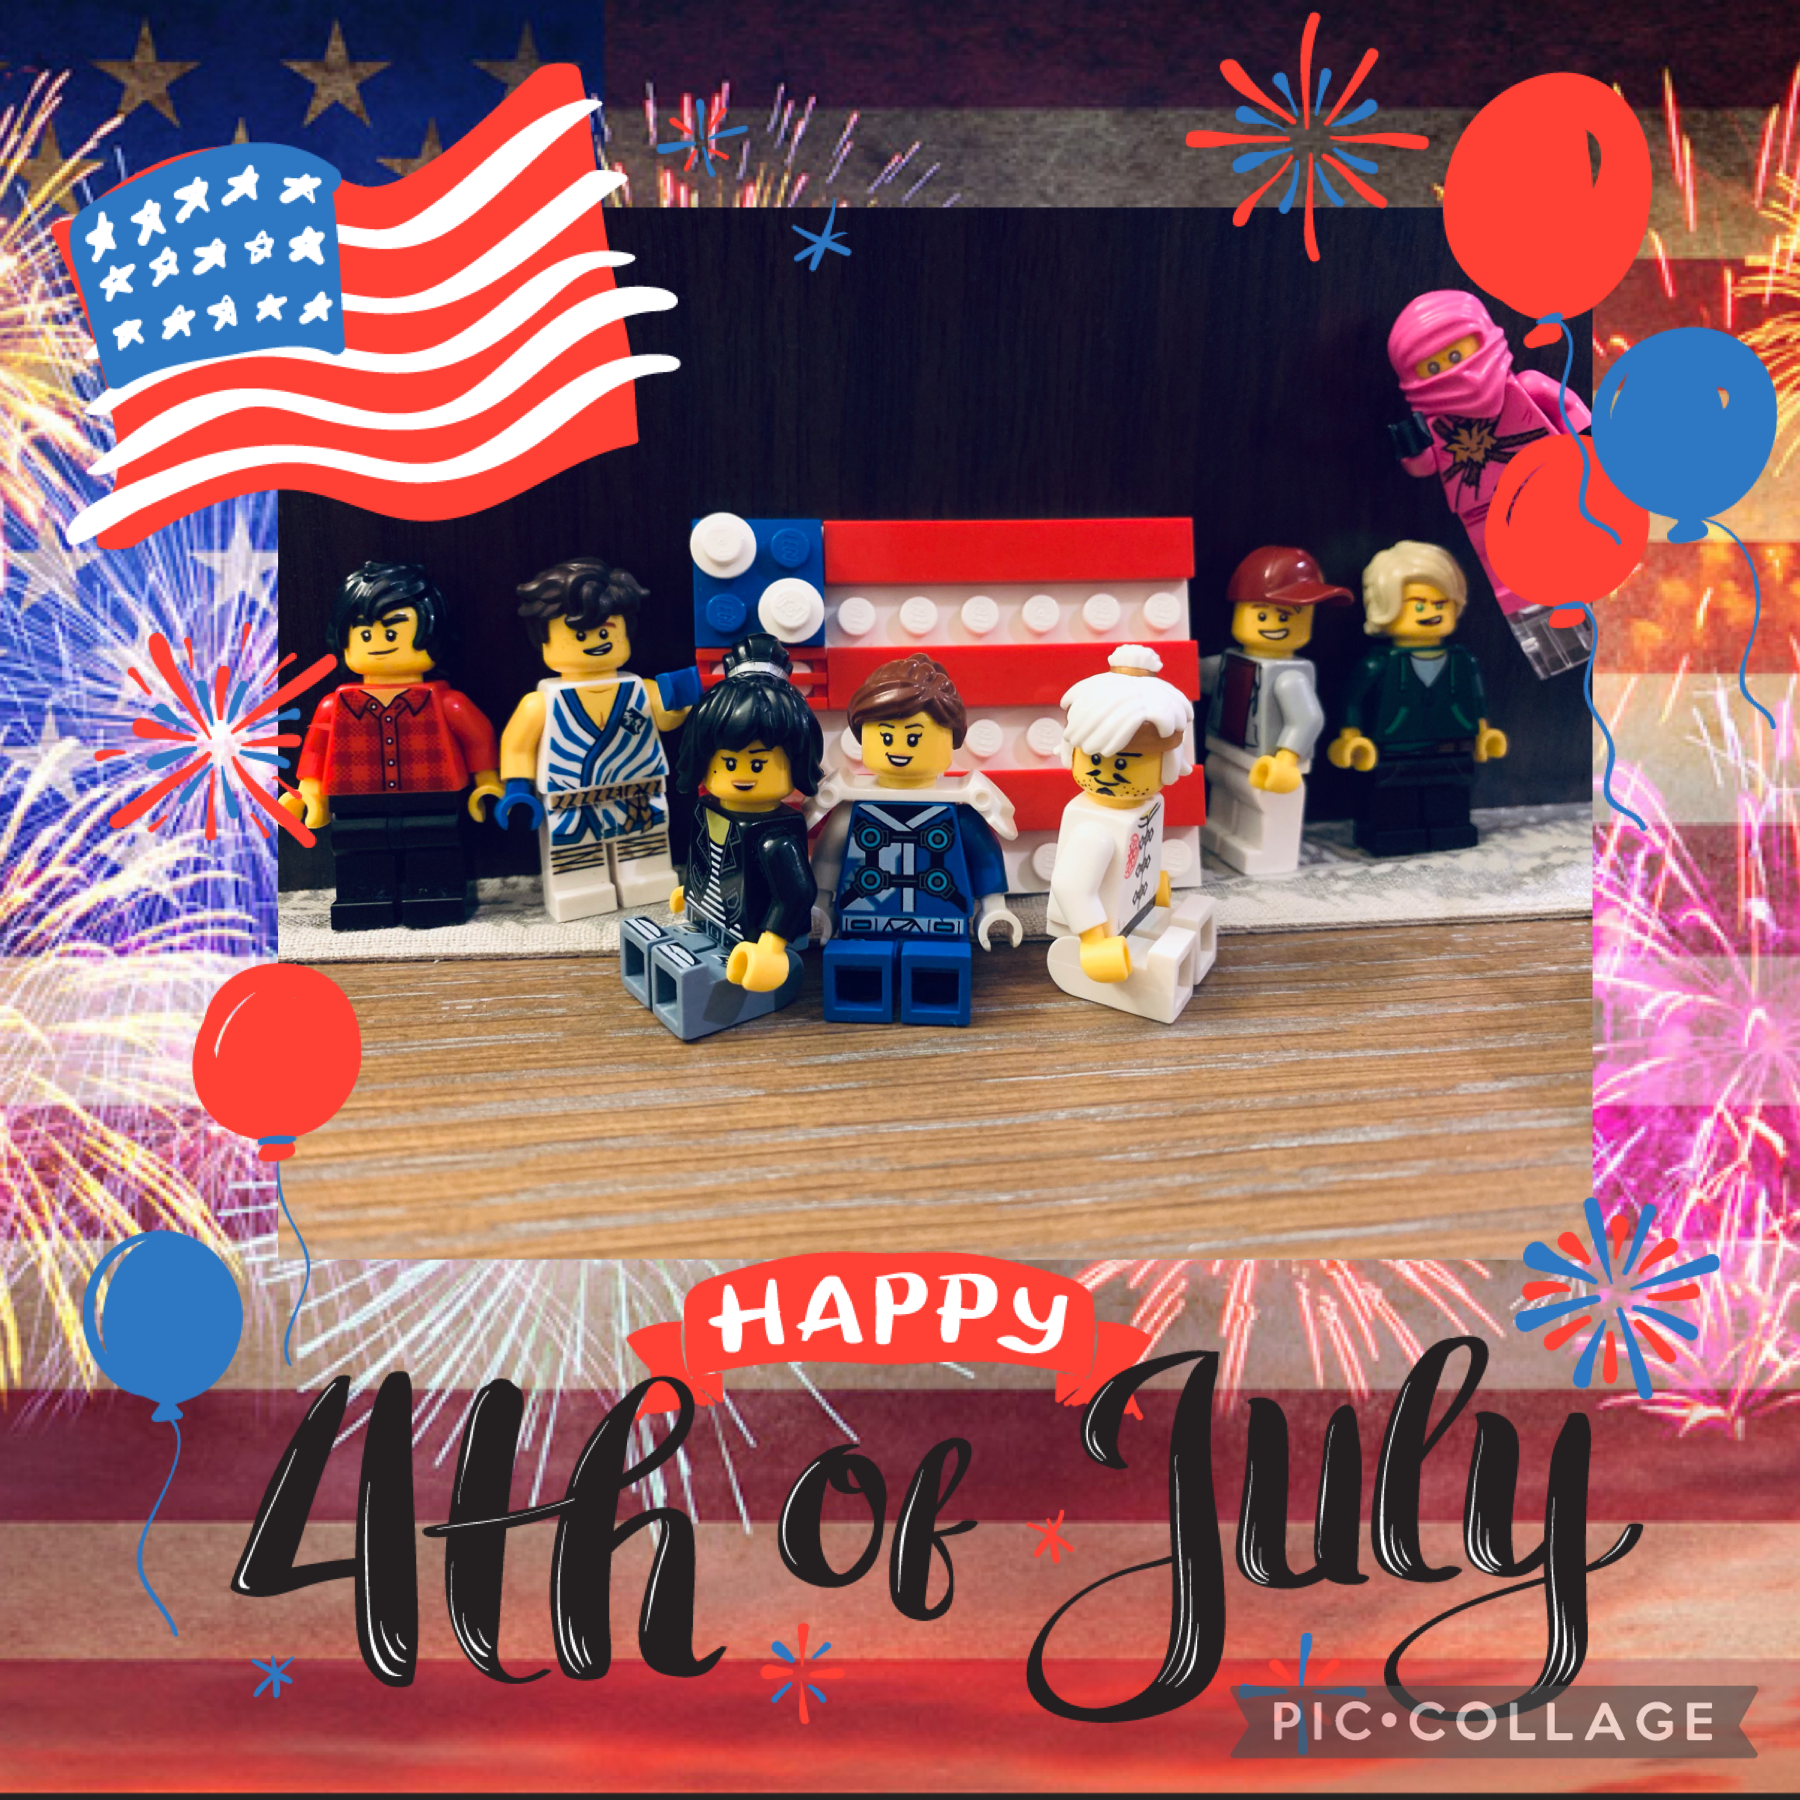 4th of July Collage with LEGOs
-Mango